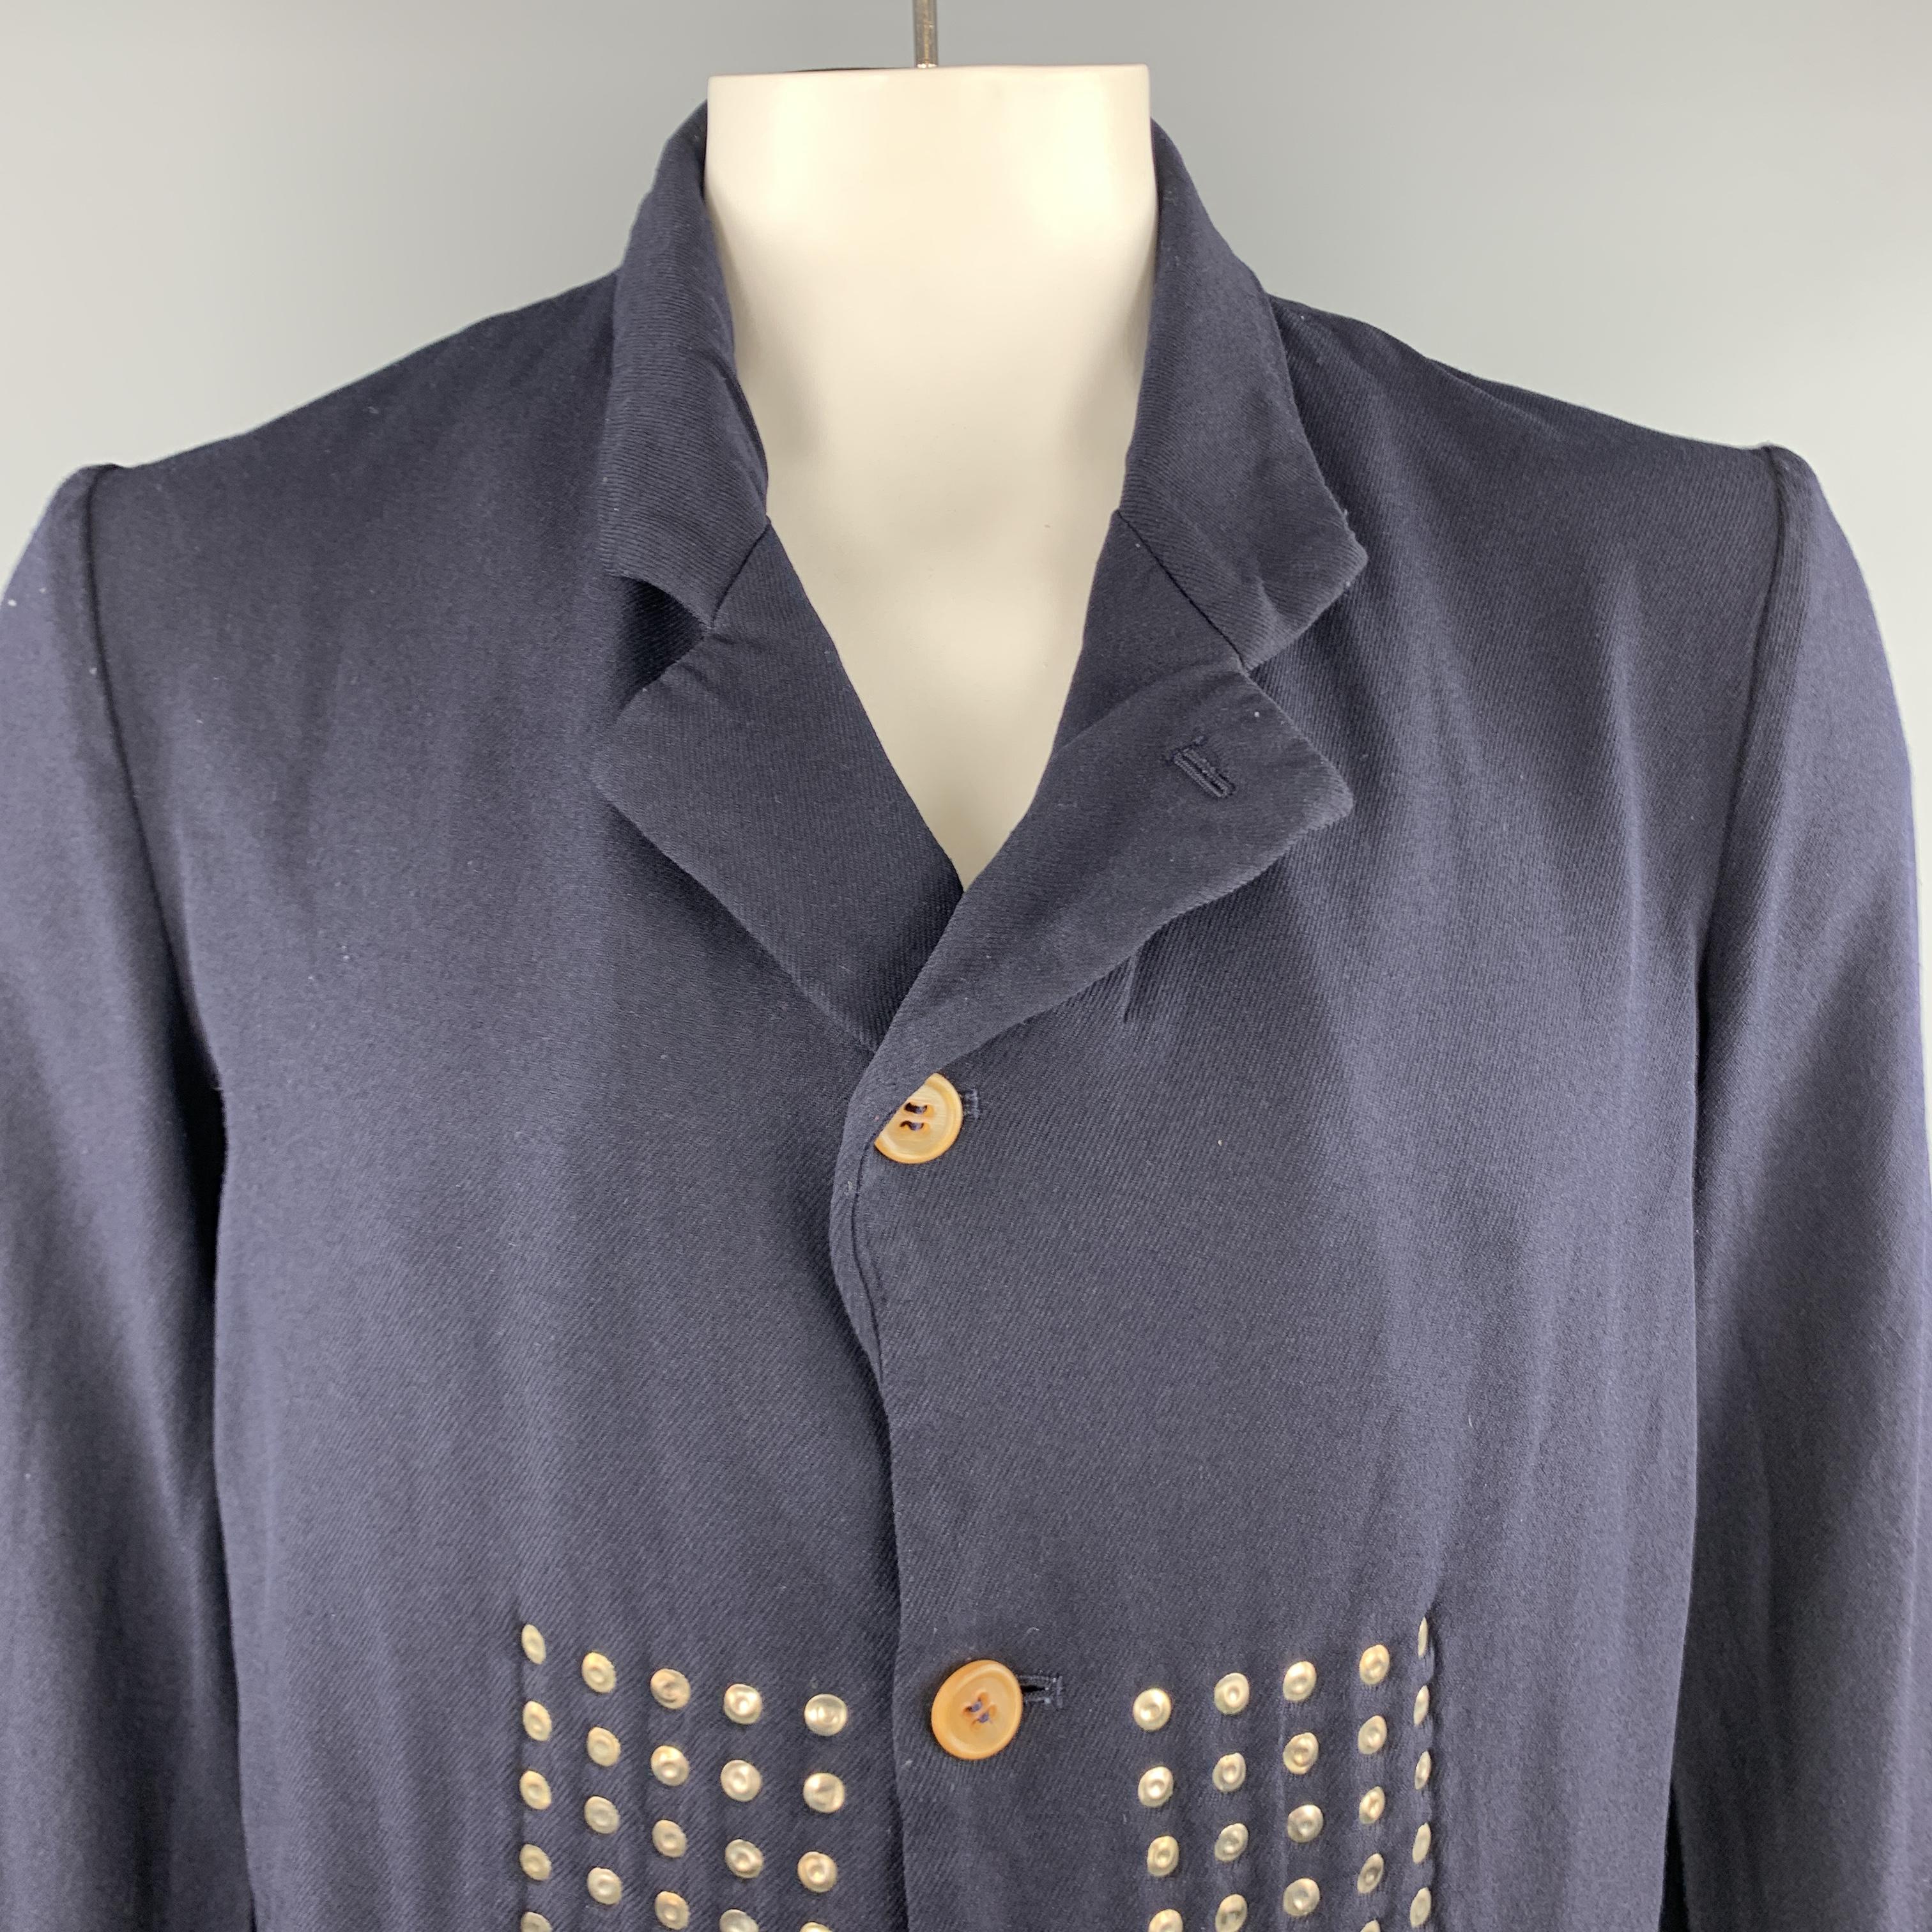 COMME des GARCONS HOMME PLUS EVER GREEN sport coat comes in navy twill with a pointed lapel, four button single breasted, front, and reverse stud embellishments. Looks great inside out.  Made in Japan.

Excellent Pre-Owned Condition.
Marked: